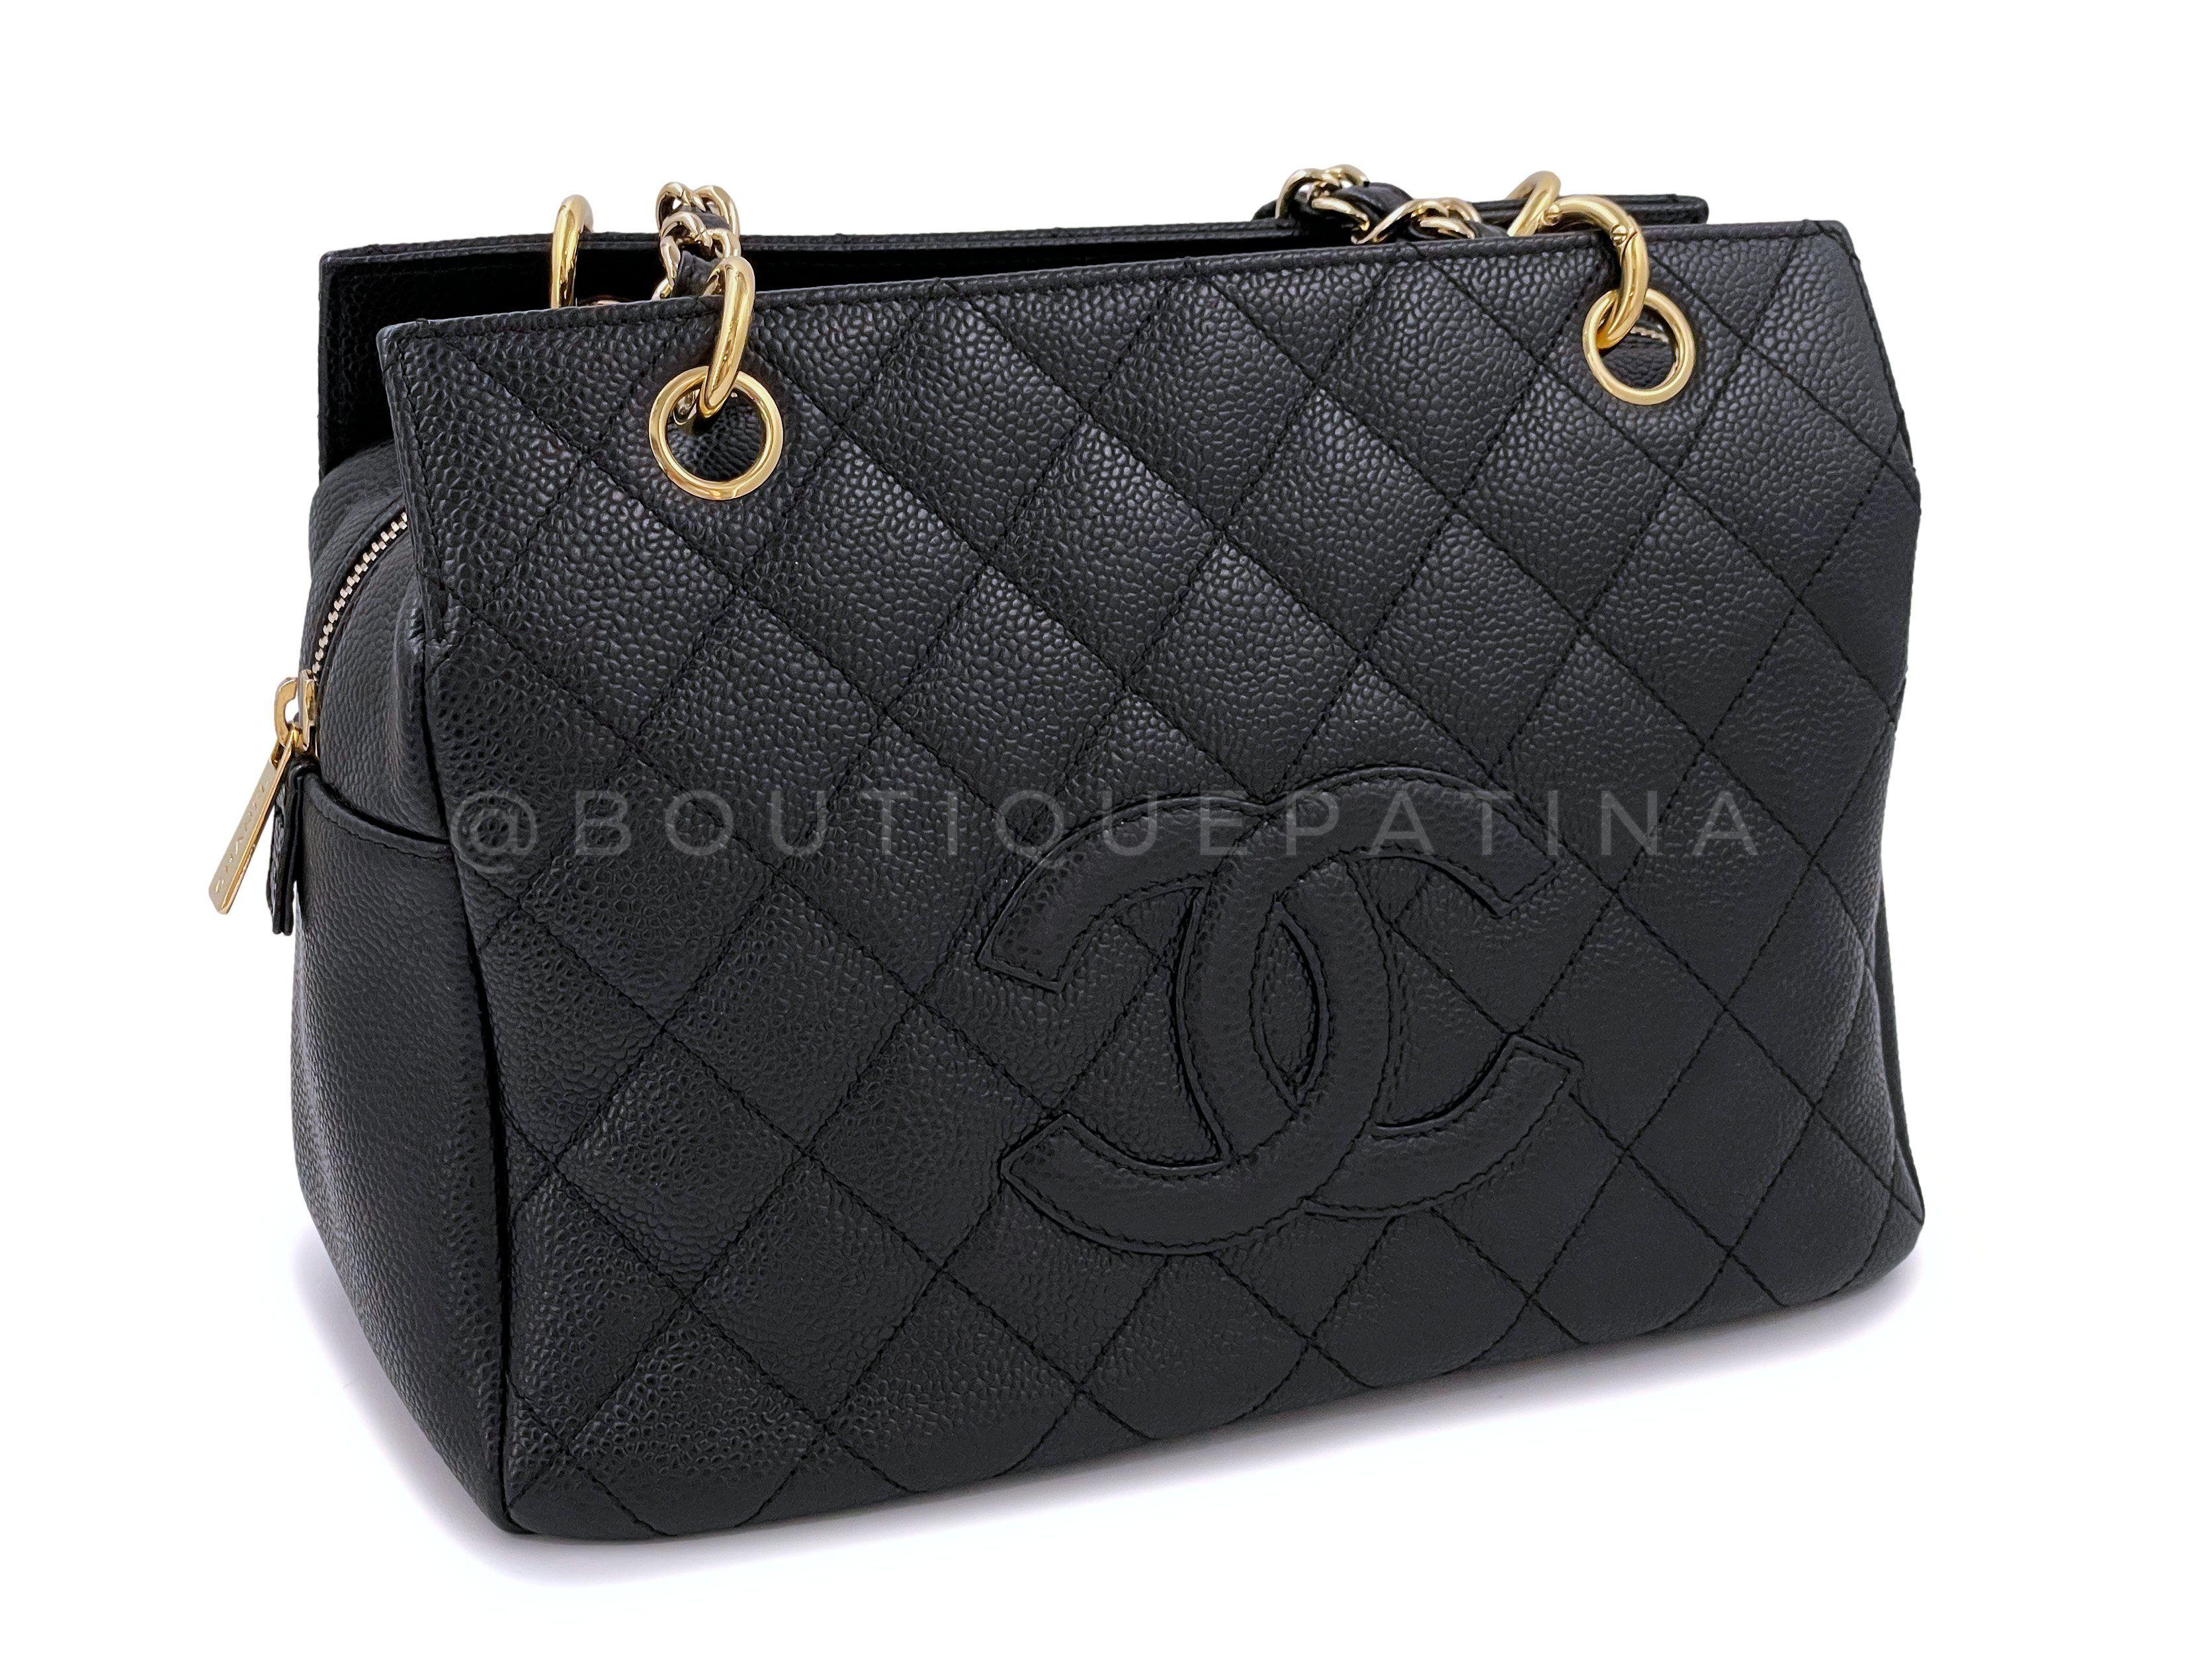 Chanel 2007 Vintage Caviar Petite Timeless Shopper Tote PTT Bag Black GHW 66548 In Excellent Condition In Costa Mesa, CA